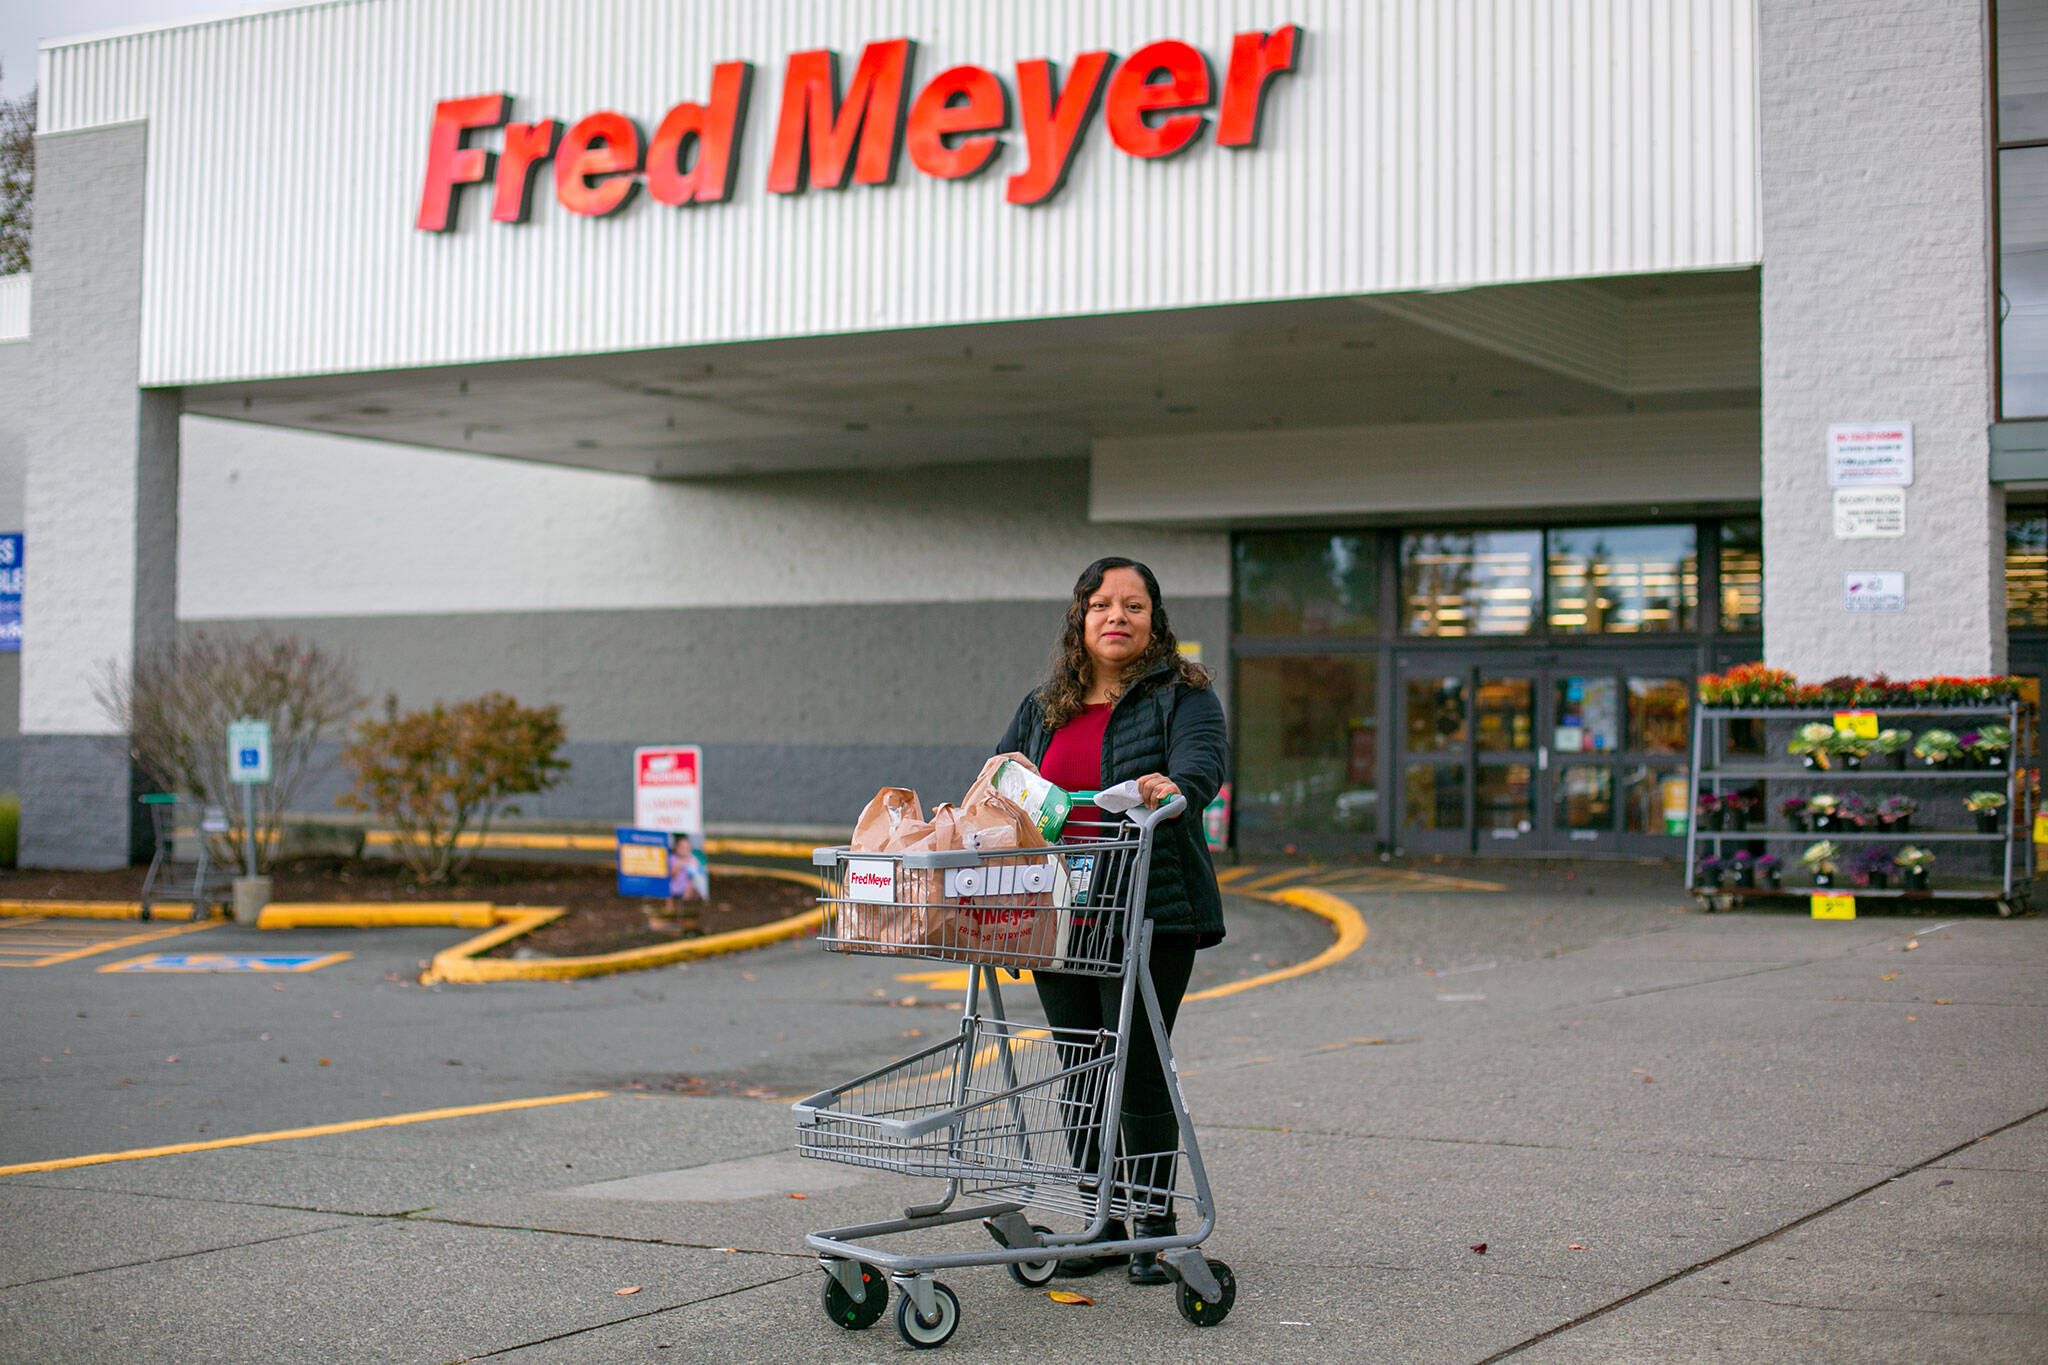 As Fred Meyer cites 'concerns,' Everett neighbors can't imagine losing it